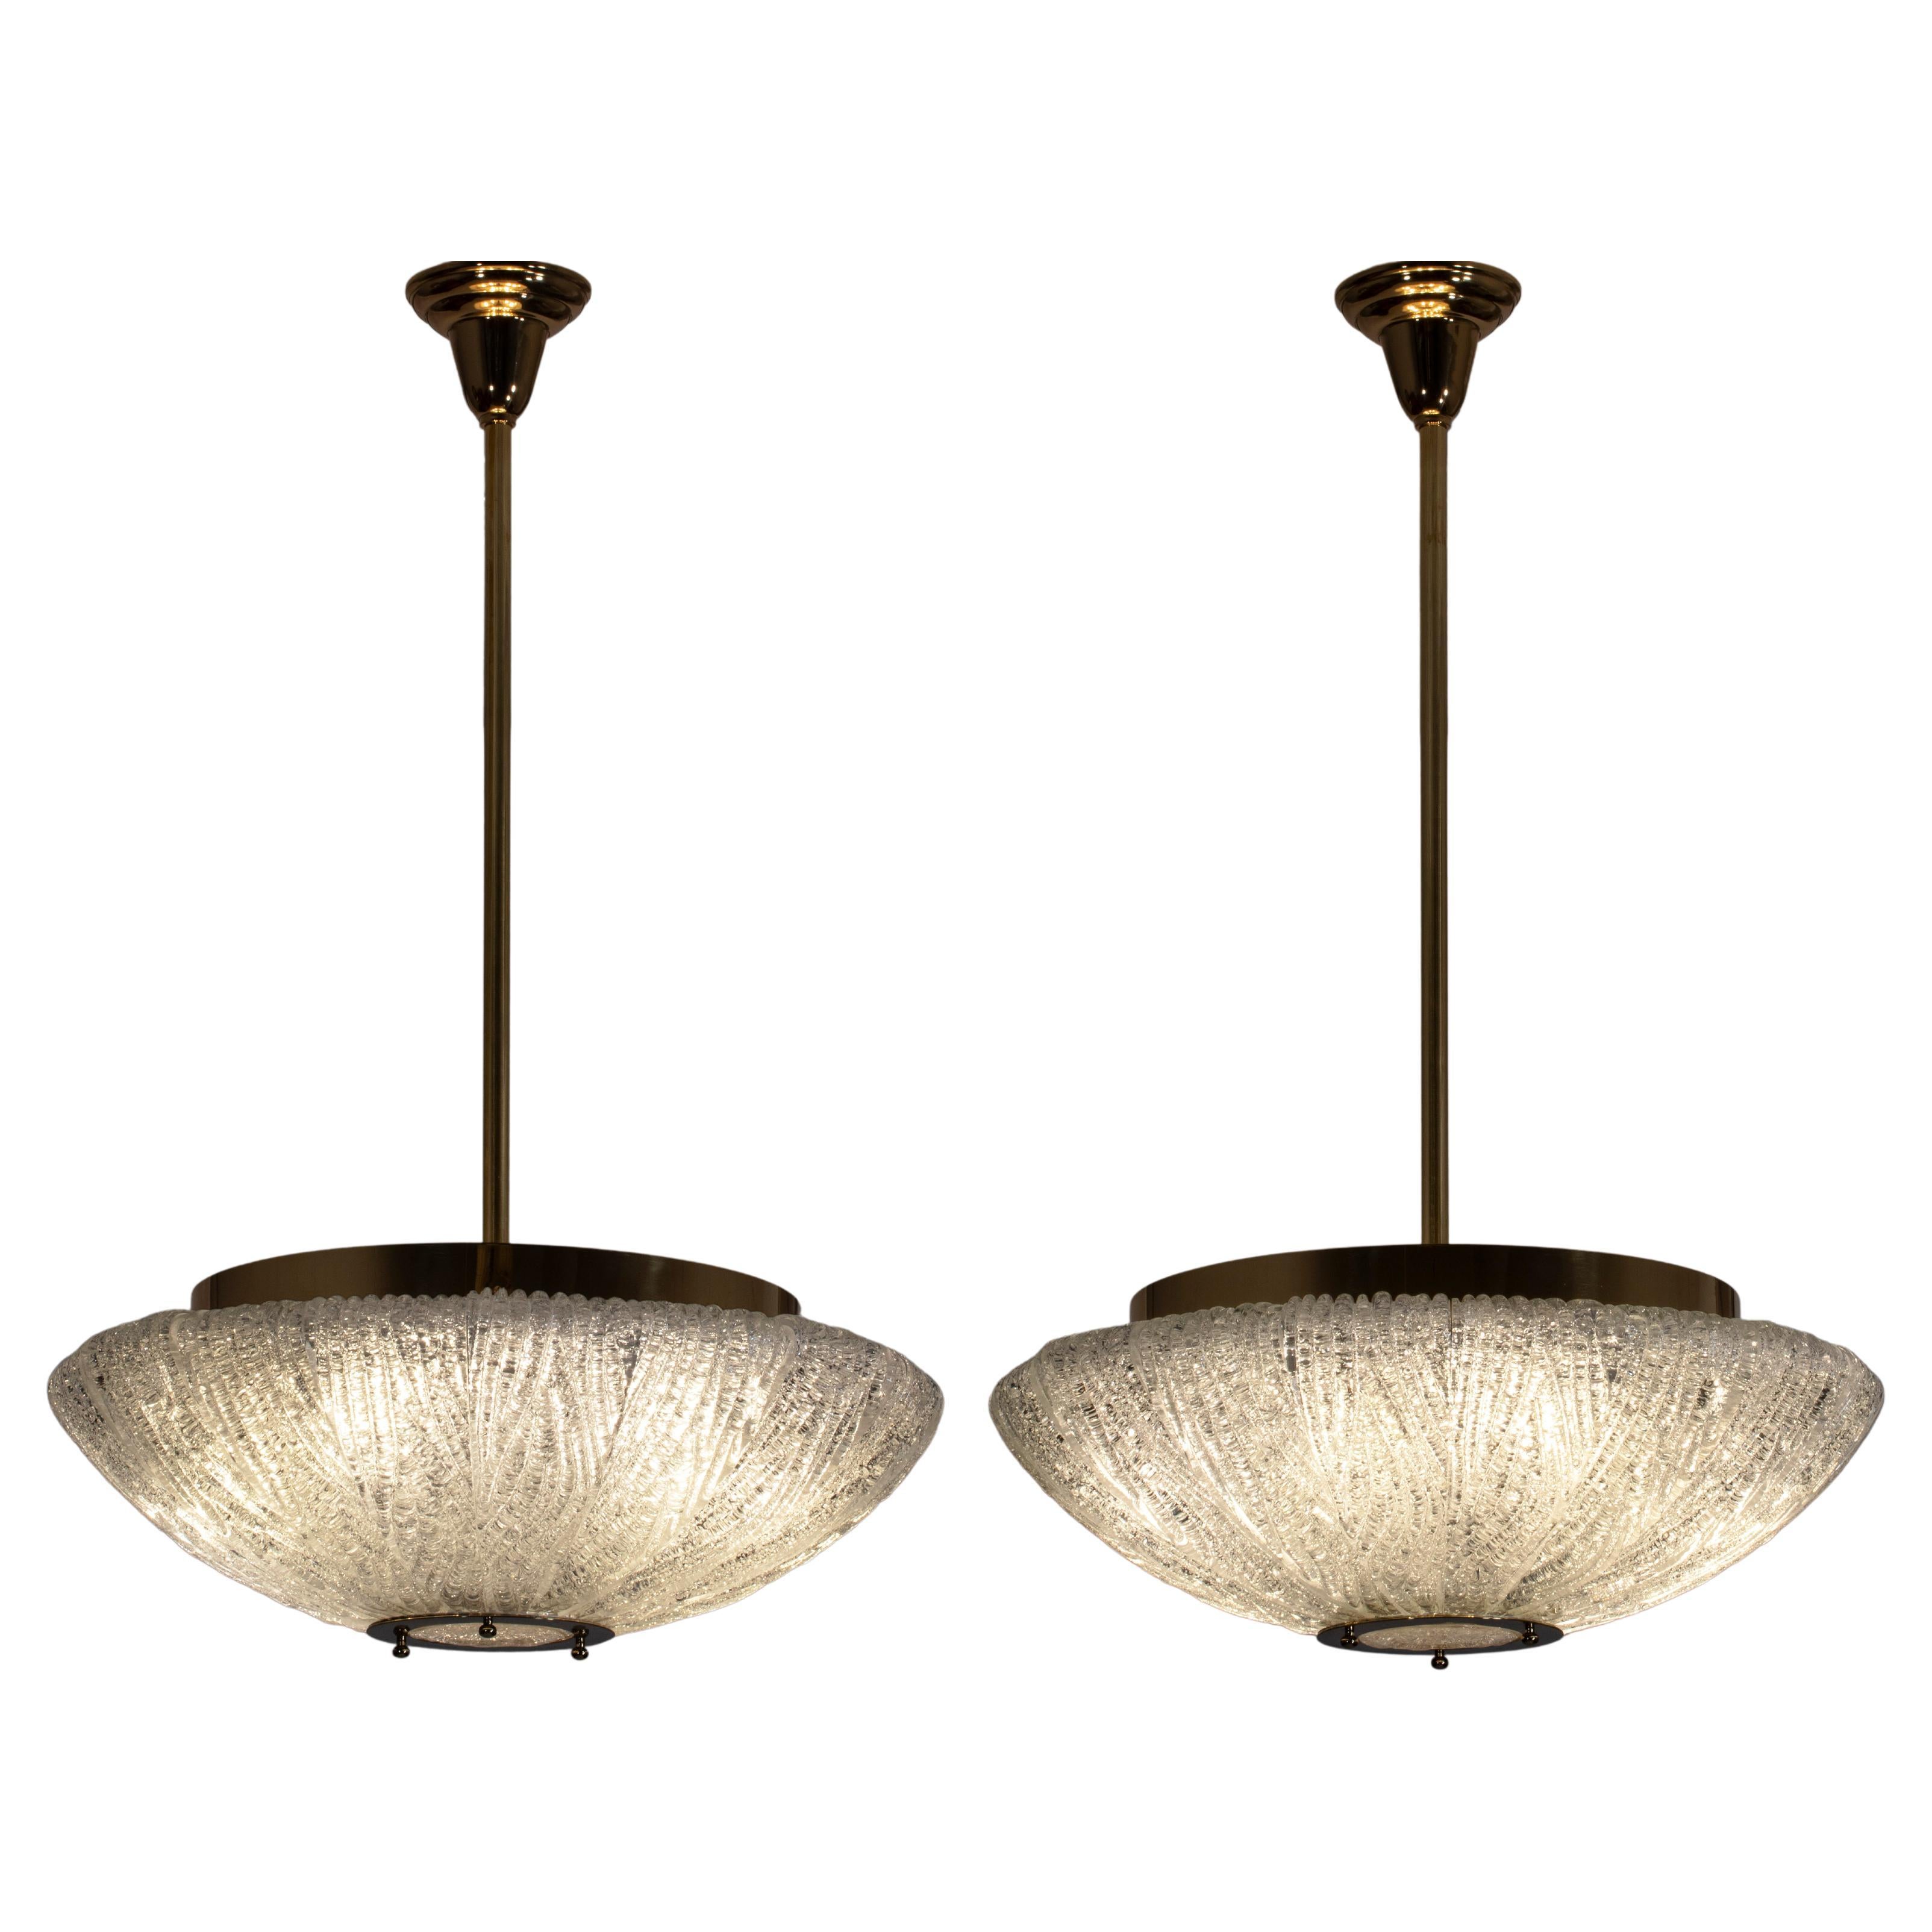 Barovier & Toso Attributed, Pair of Murano Colorless Glass and Brass Chandeliers